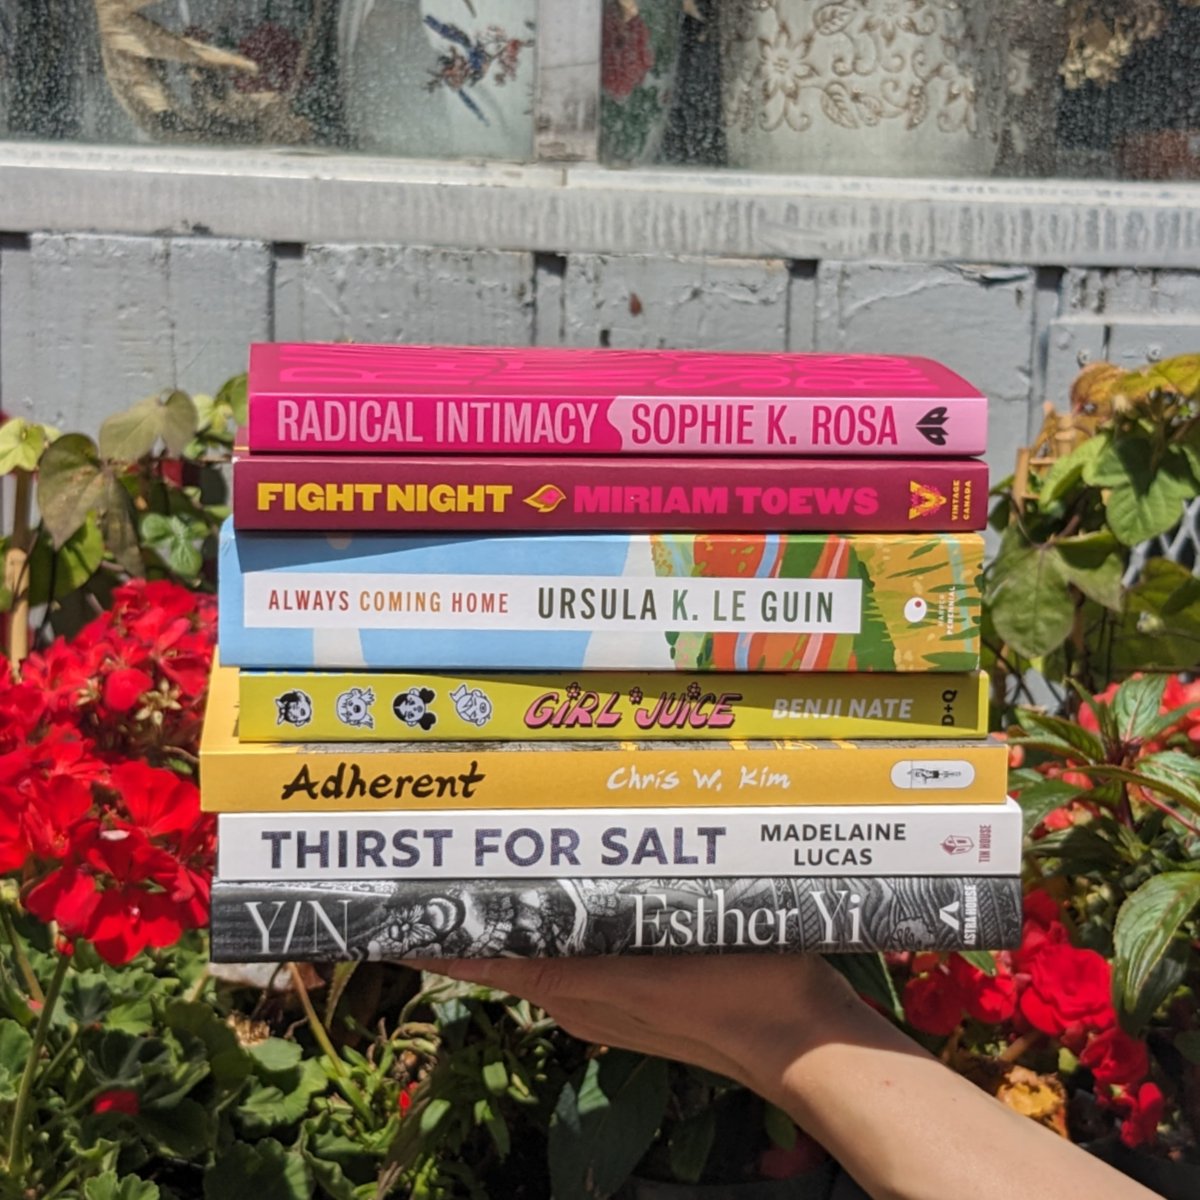 Let’s cut to the chase; it’s hot out, and you want a book! ☀ Jules is kicking off our Summer Reads selections on the blog, with plenty of upcoming releases to look forward to >> mtl.drawnandquarterly.com/posts/summer-r…